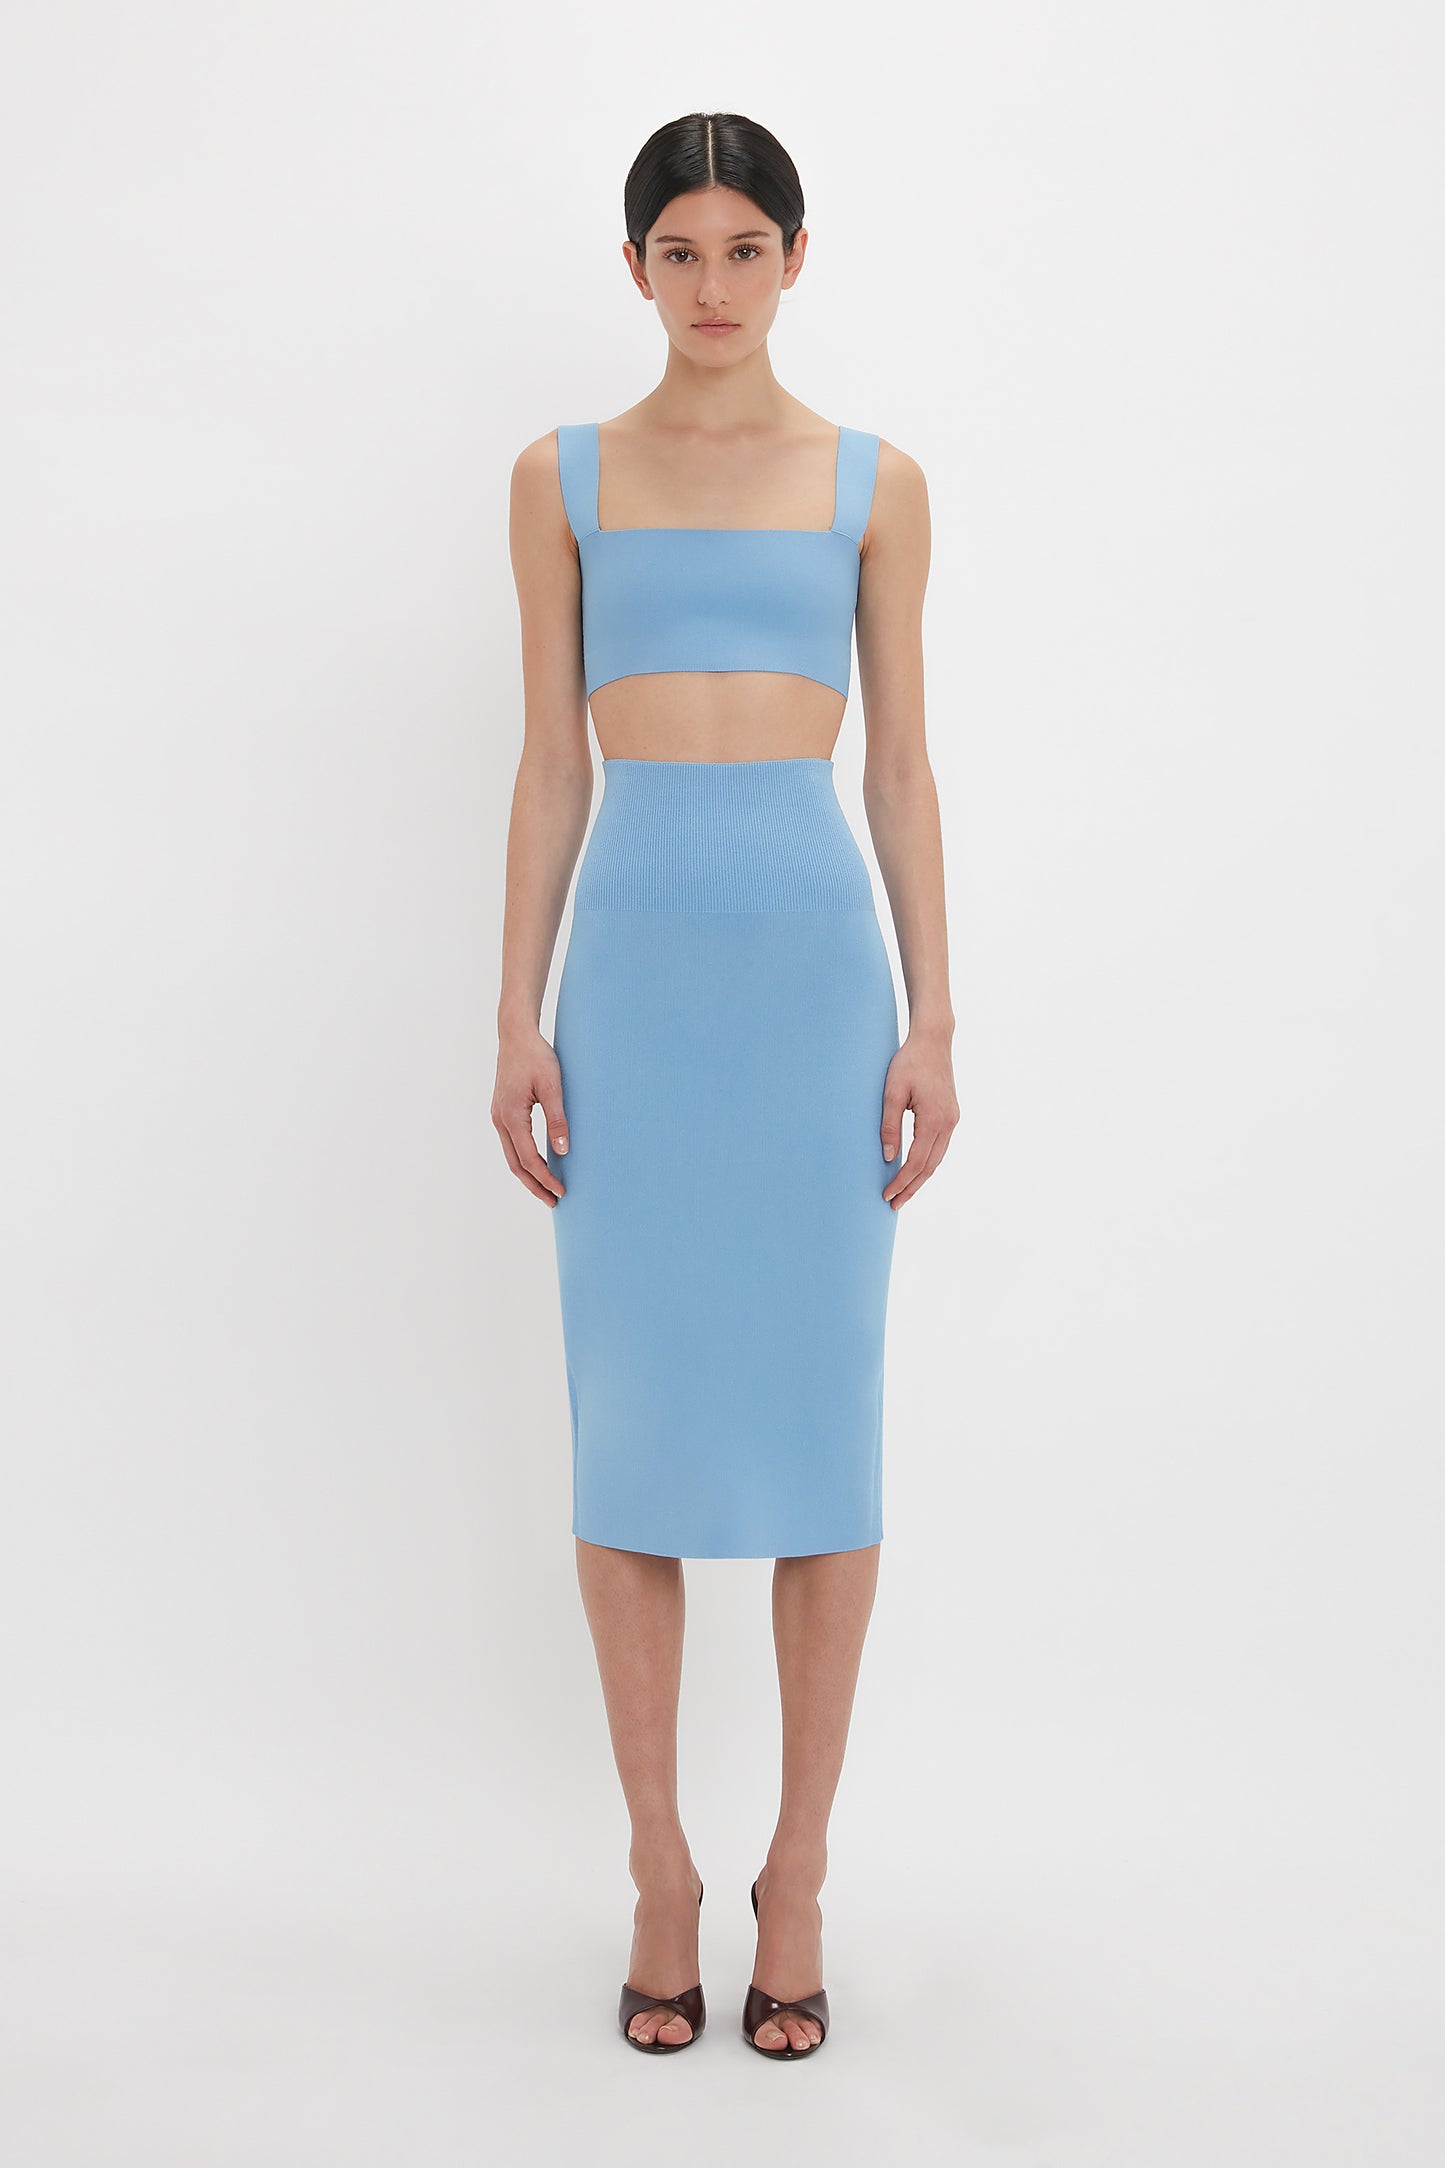 A person stands facing the camera, wearing a light blue, ultra form-fitting two-piece outfit consisting of a Victoria Beckham Strap Bandeau Top In Marina and a fitted midi skirt. They are also wearing brown open-toe high heel sandals.